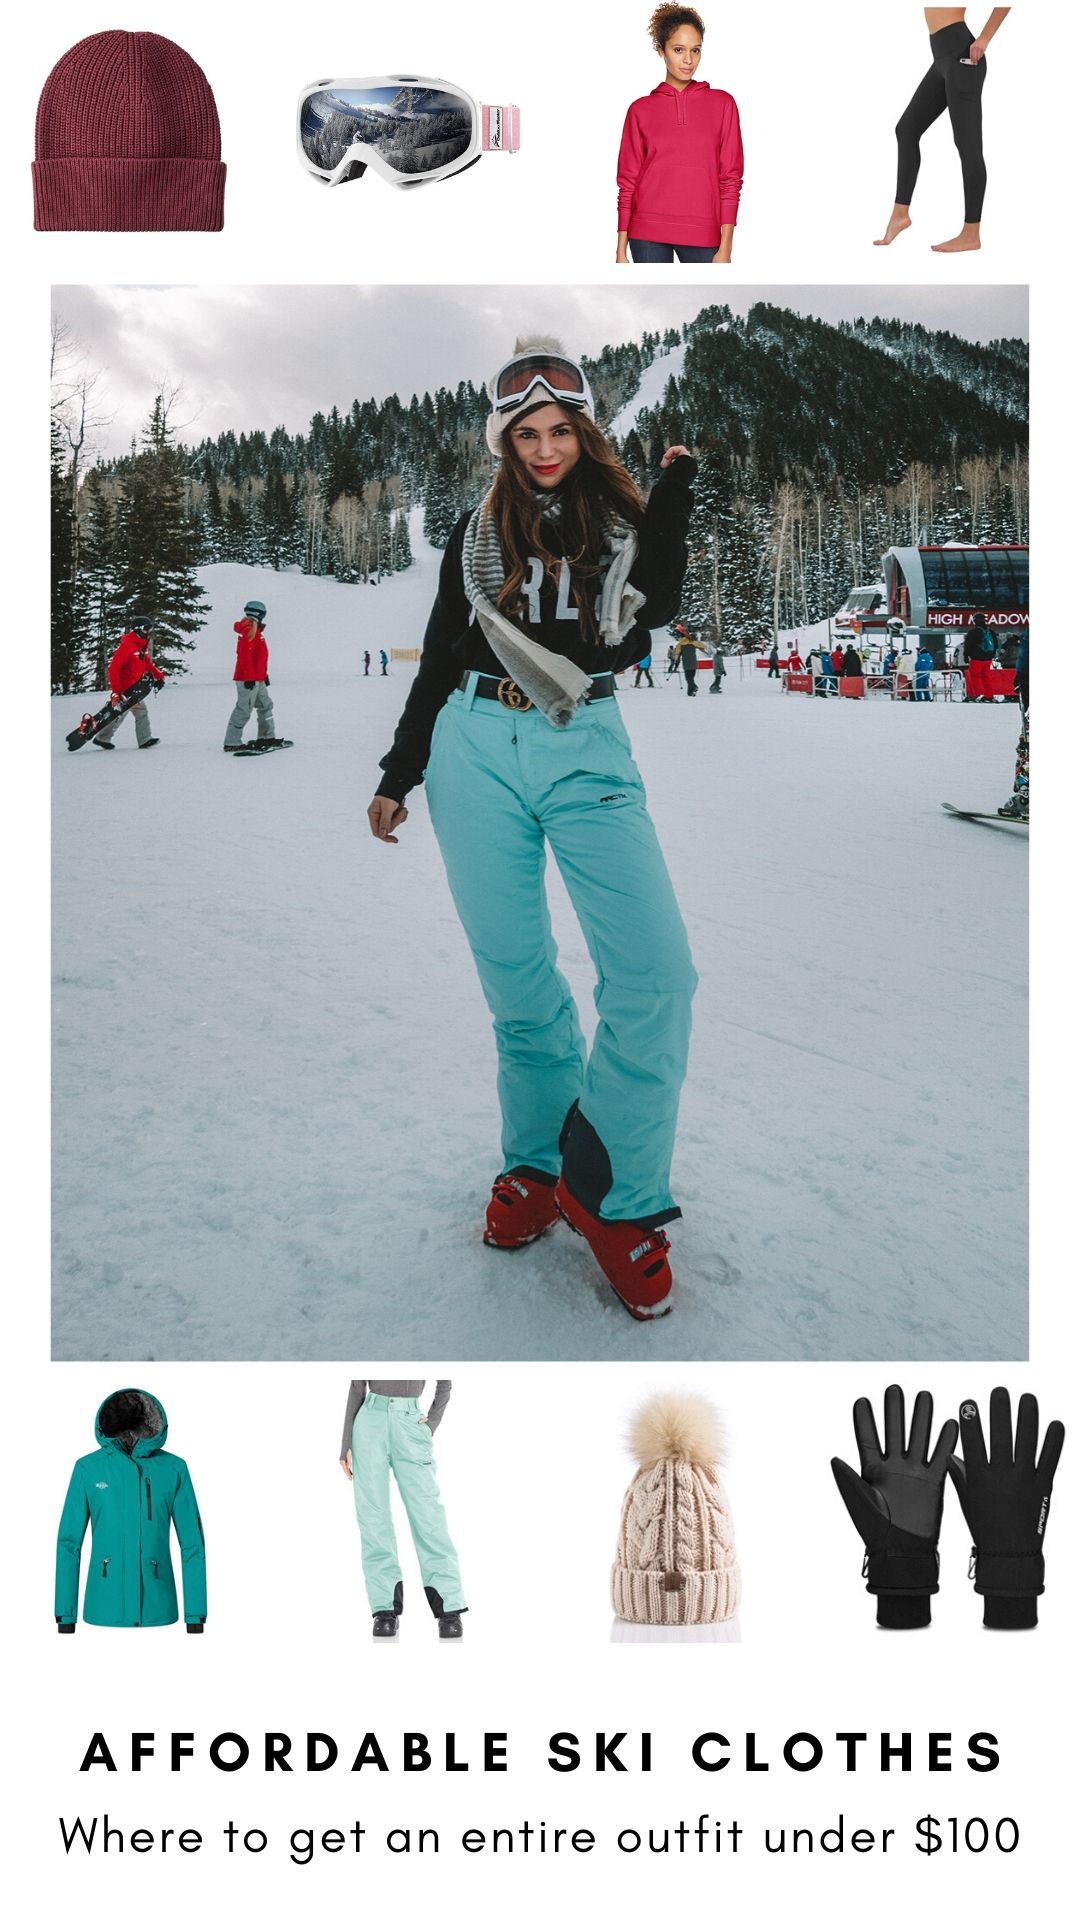 12 Cute Ski Outfits & Accessories for your Next Trip to the Slopes